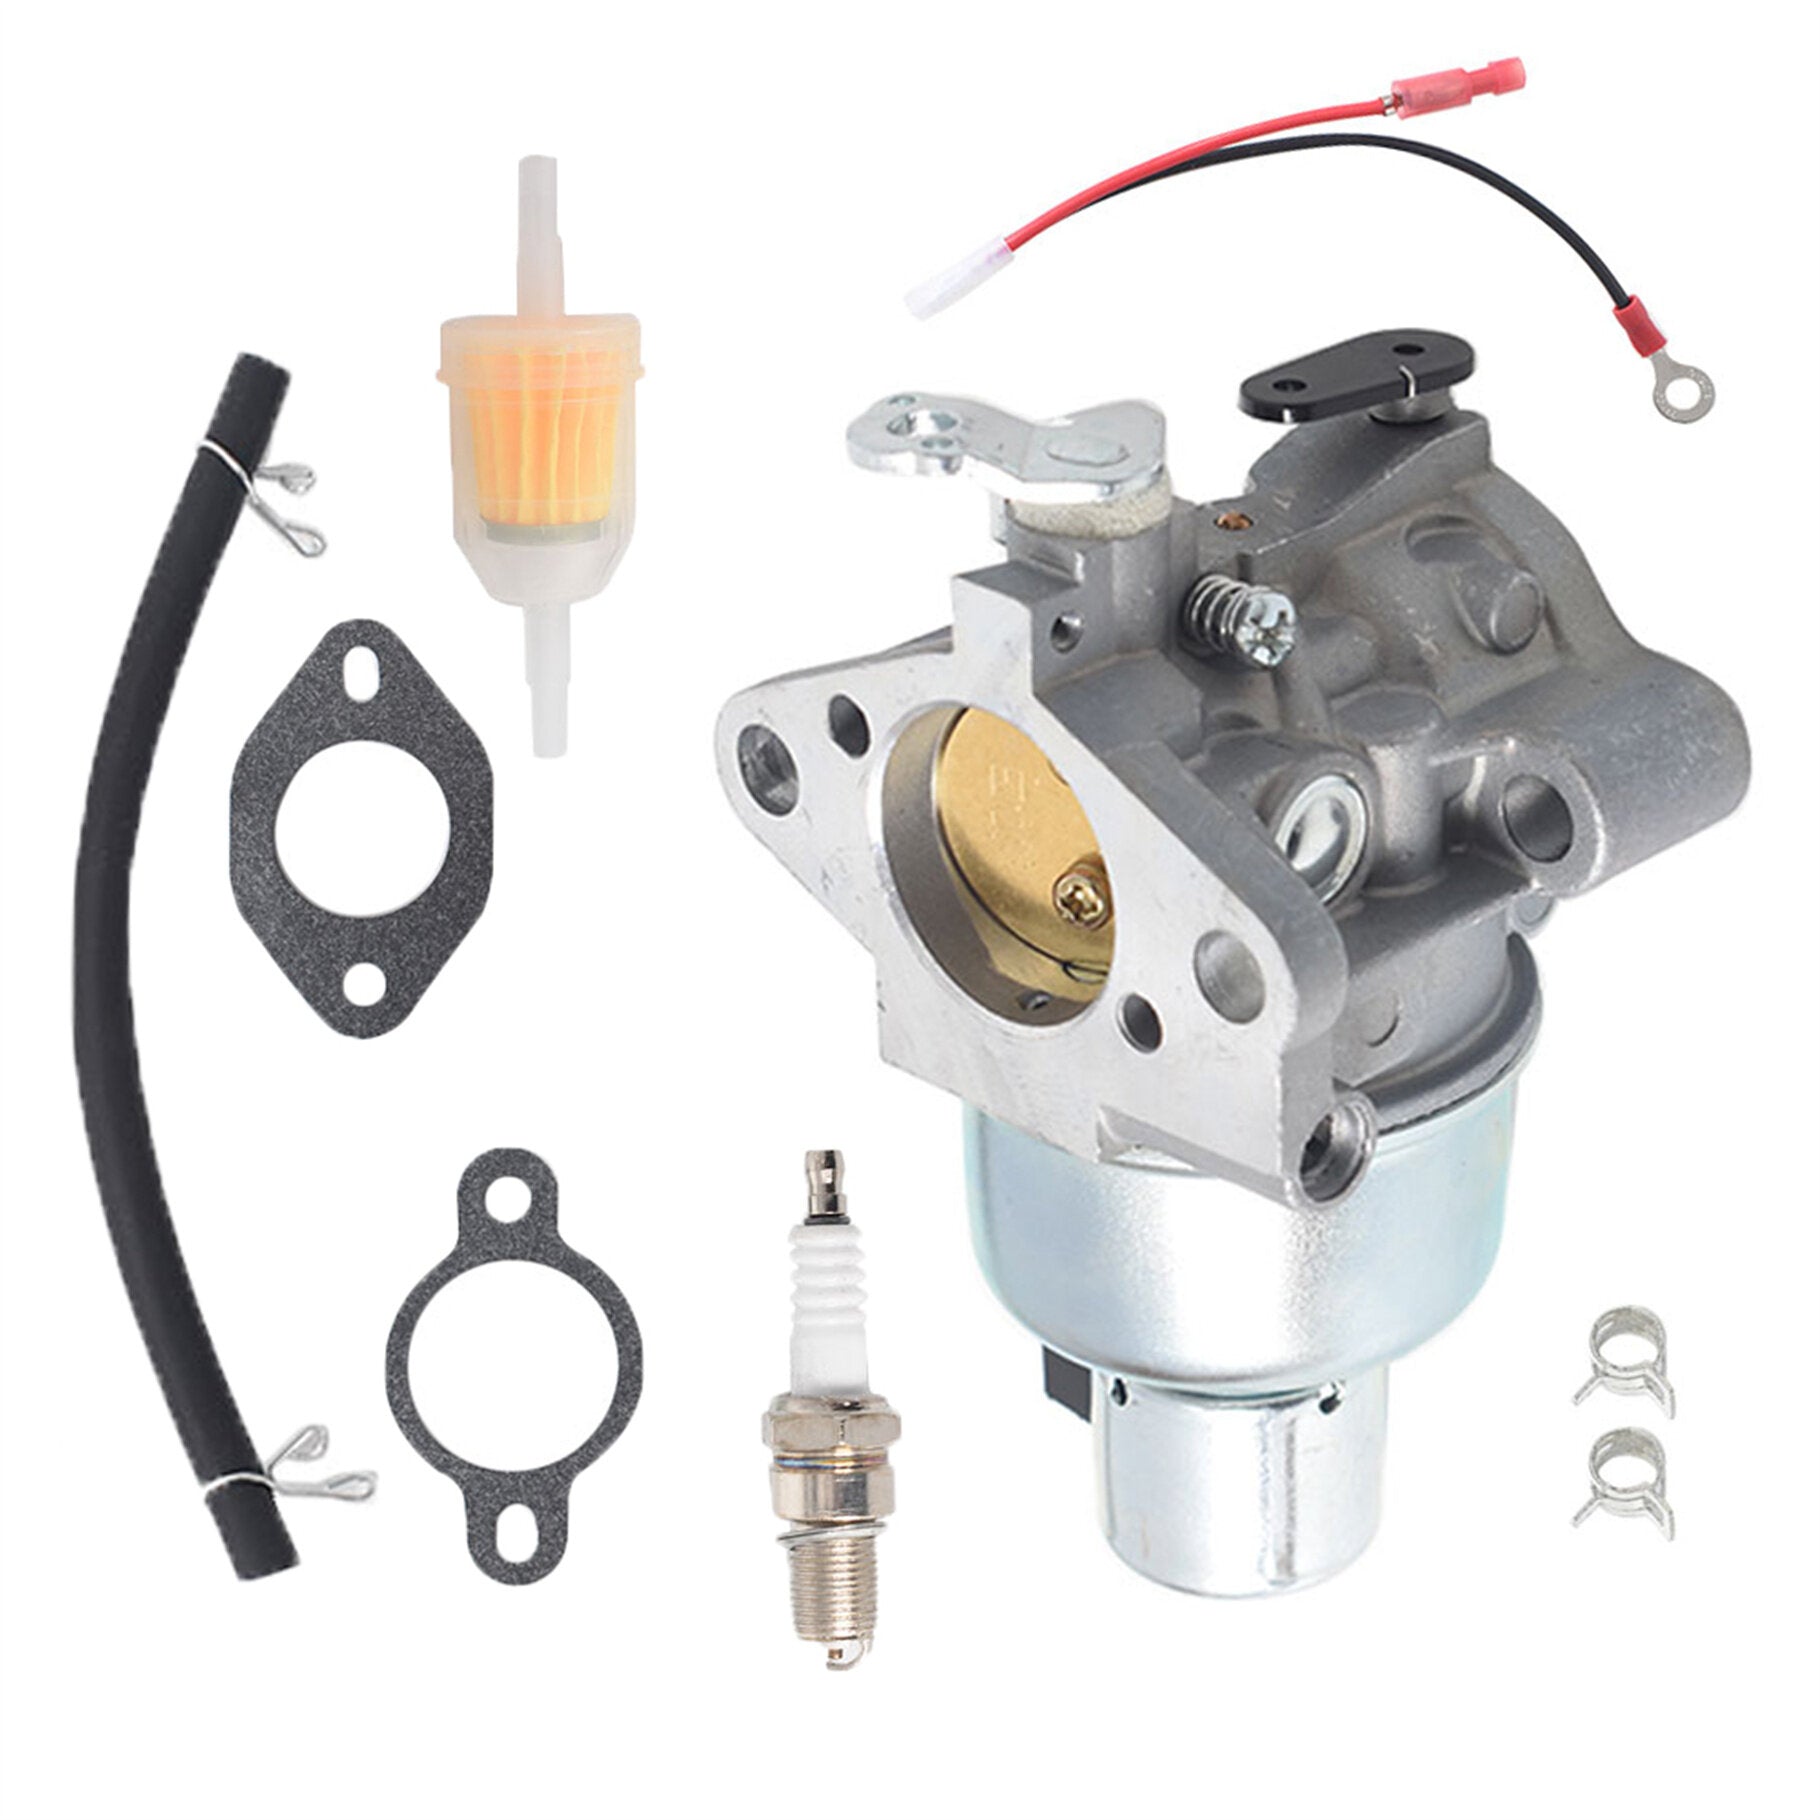 munirater 20 853 33-S Carburetor Replacement for SV530 SV540 SV590 SV600 CV15S CV16S AM131951 AM125355 Engine 15HP 16HP 17HP 18HP 19HP 20HP 21HP Engines for 74601 74603 Lawn Mower